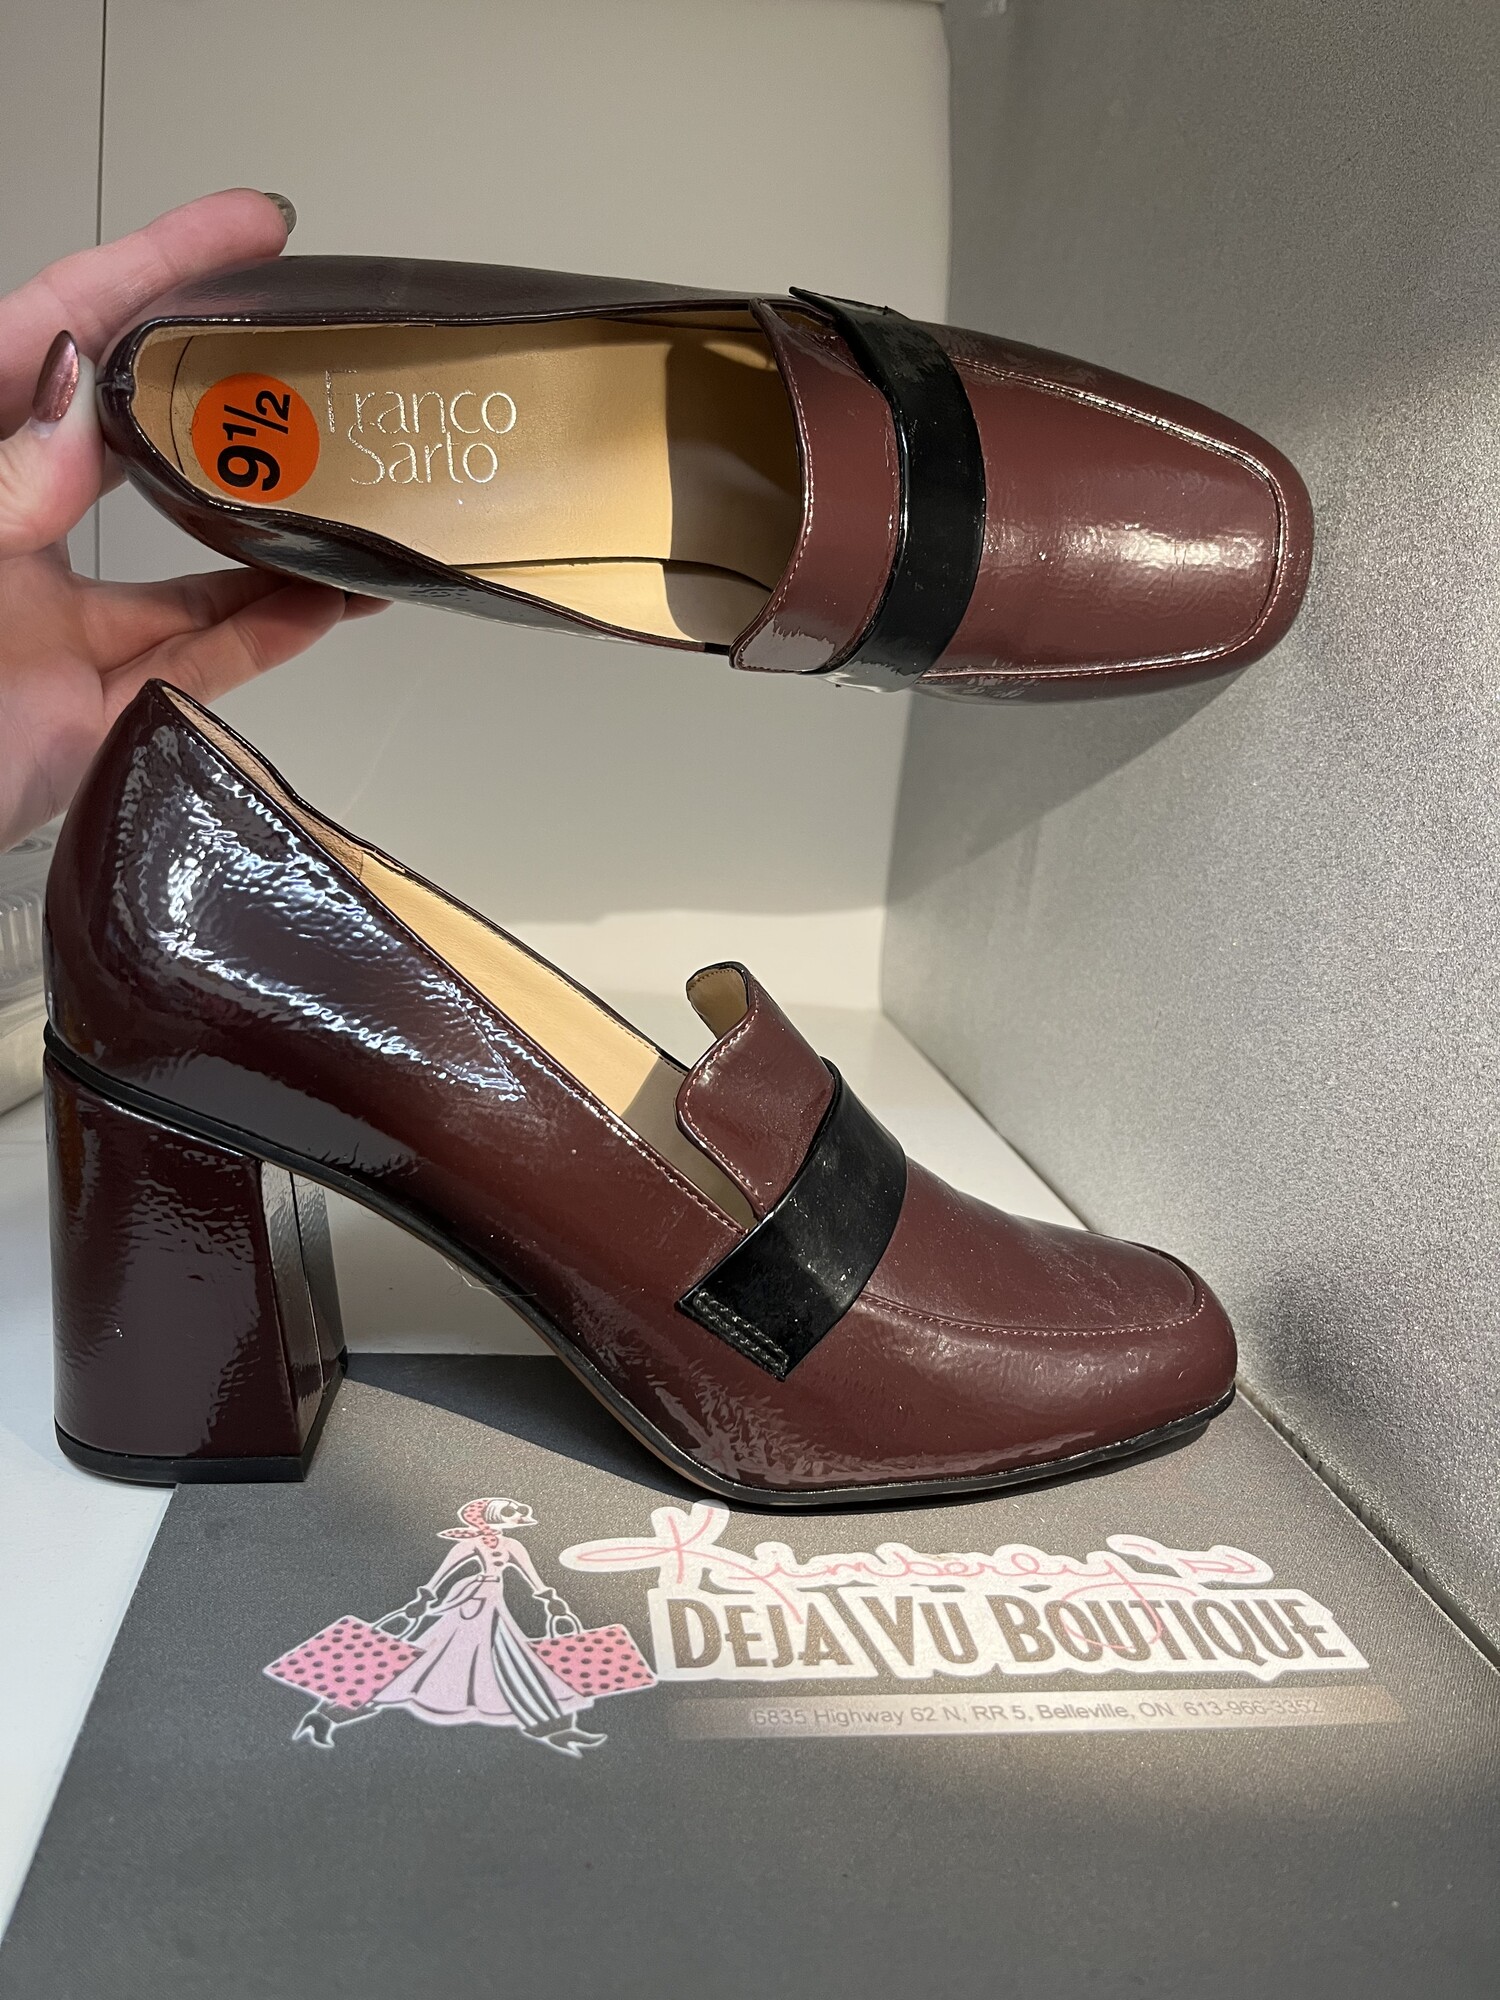 Black Strap Non leather Heels, Burgandy, Size: 9.5 in Excellent preloved condition!